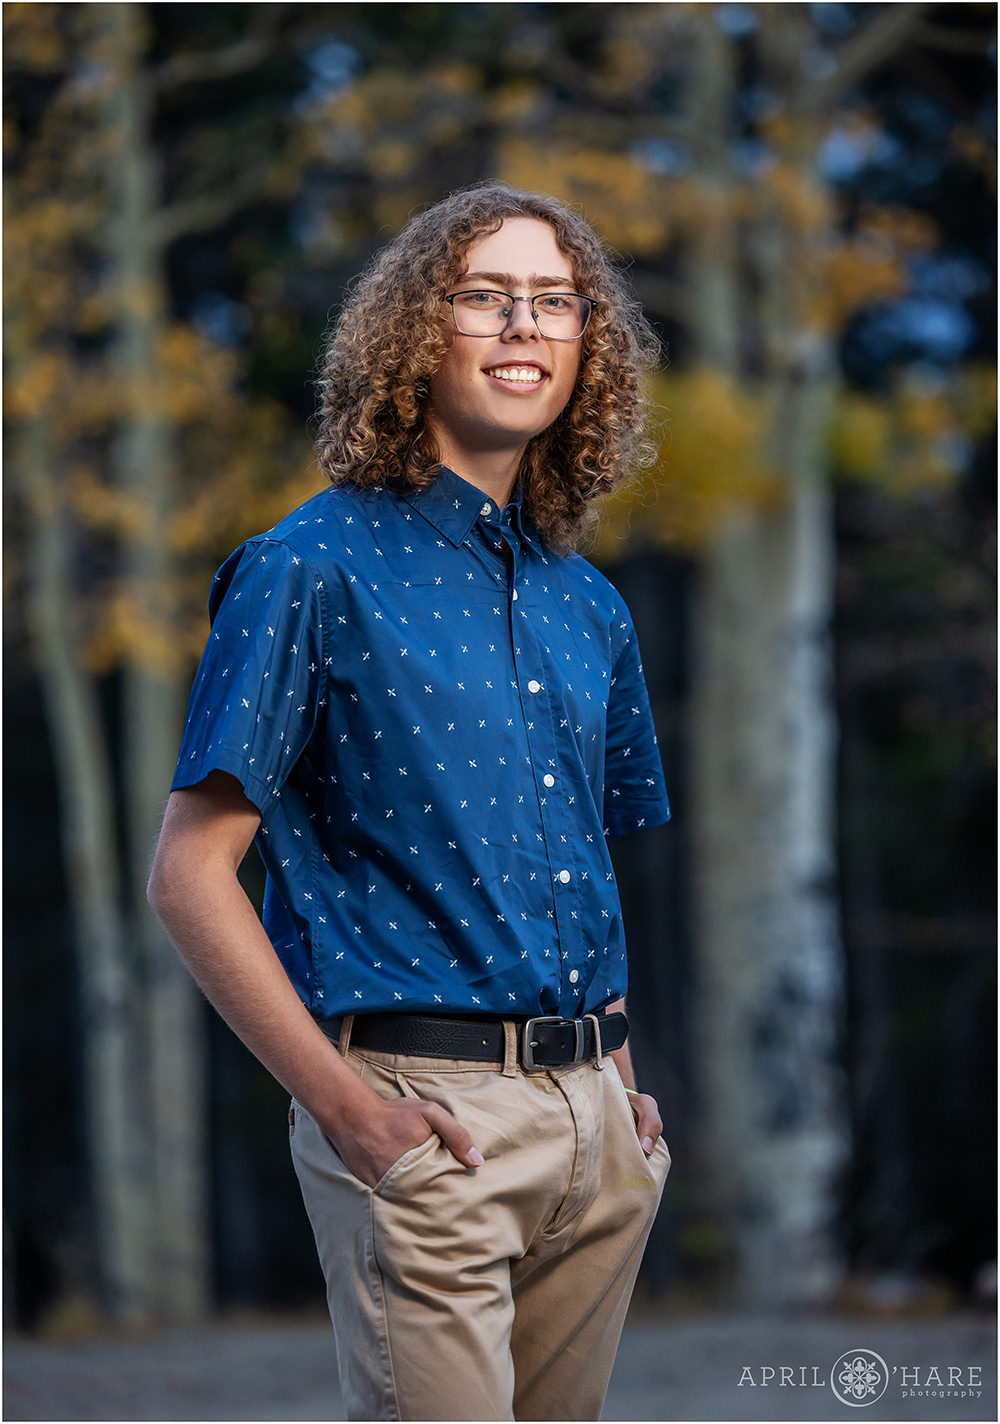 Senior portrait with fall color aspen trees backdrop in Evergreen, CO